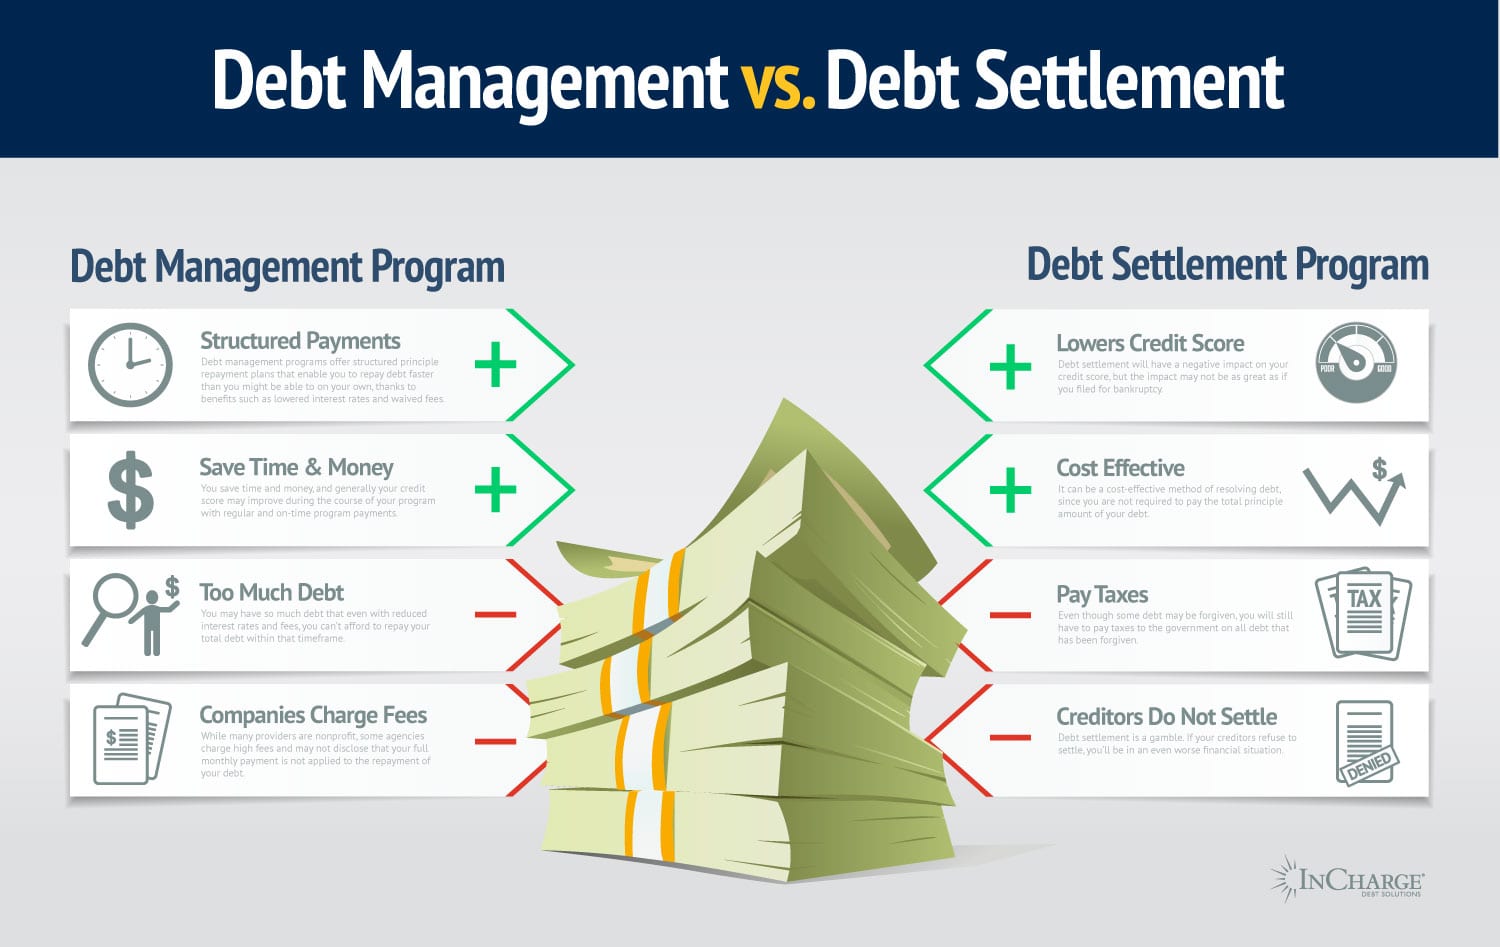 Clearpoint  Credit Counseling, Debt Management, and more